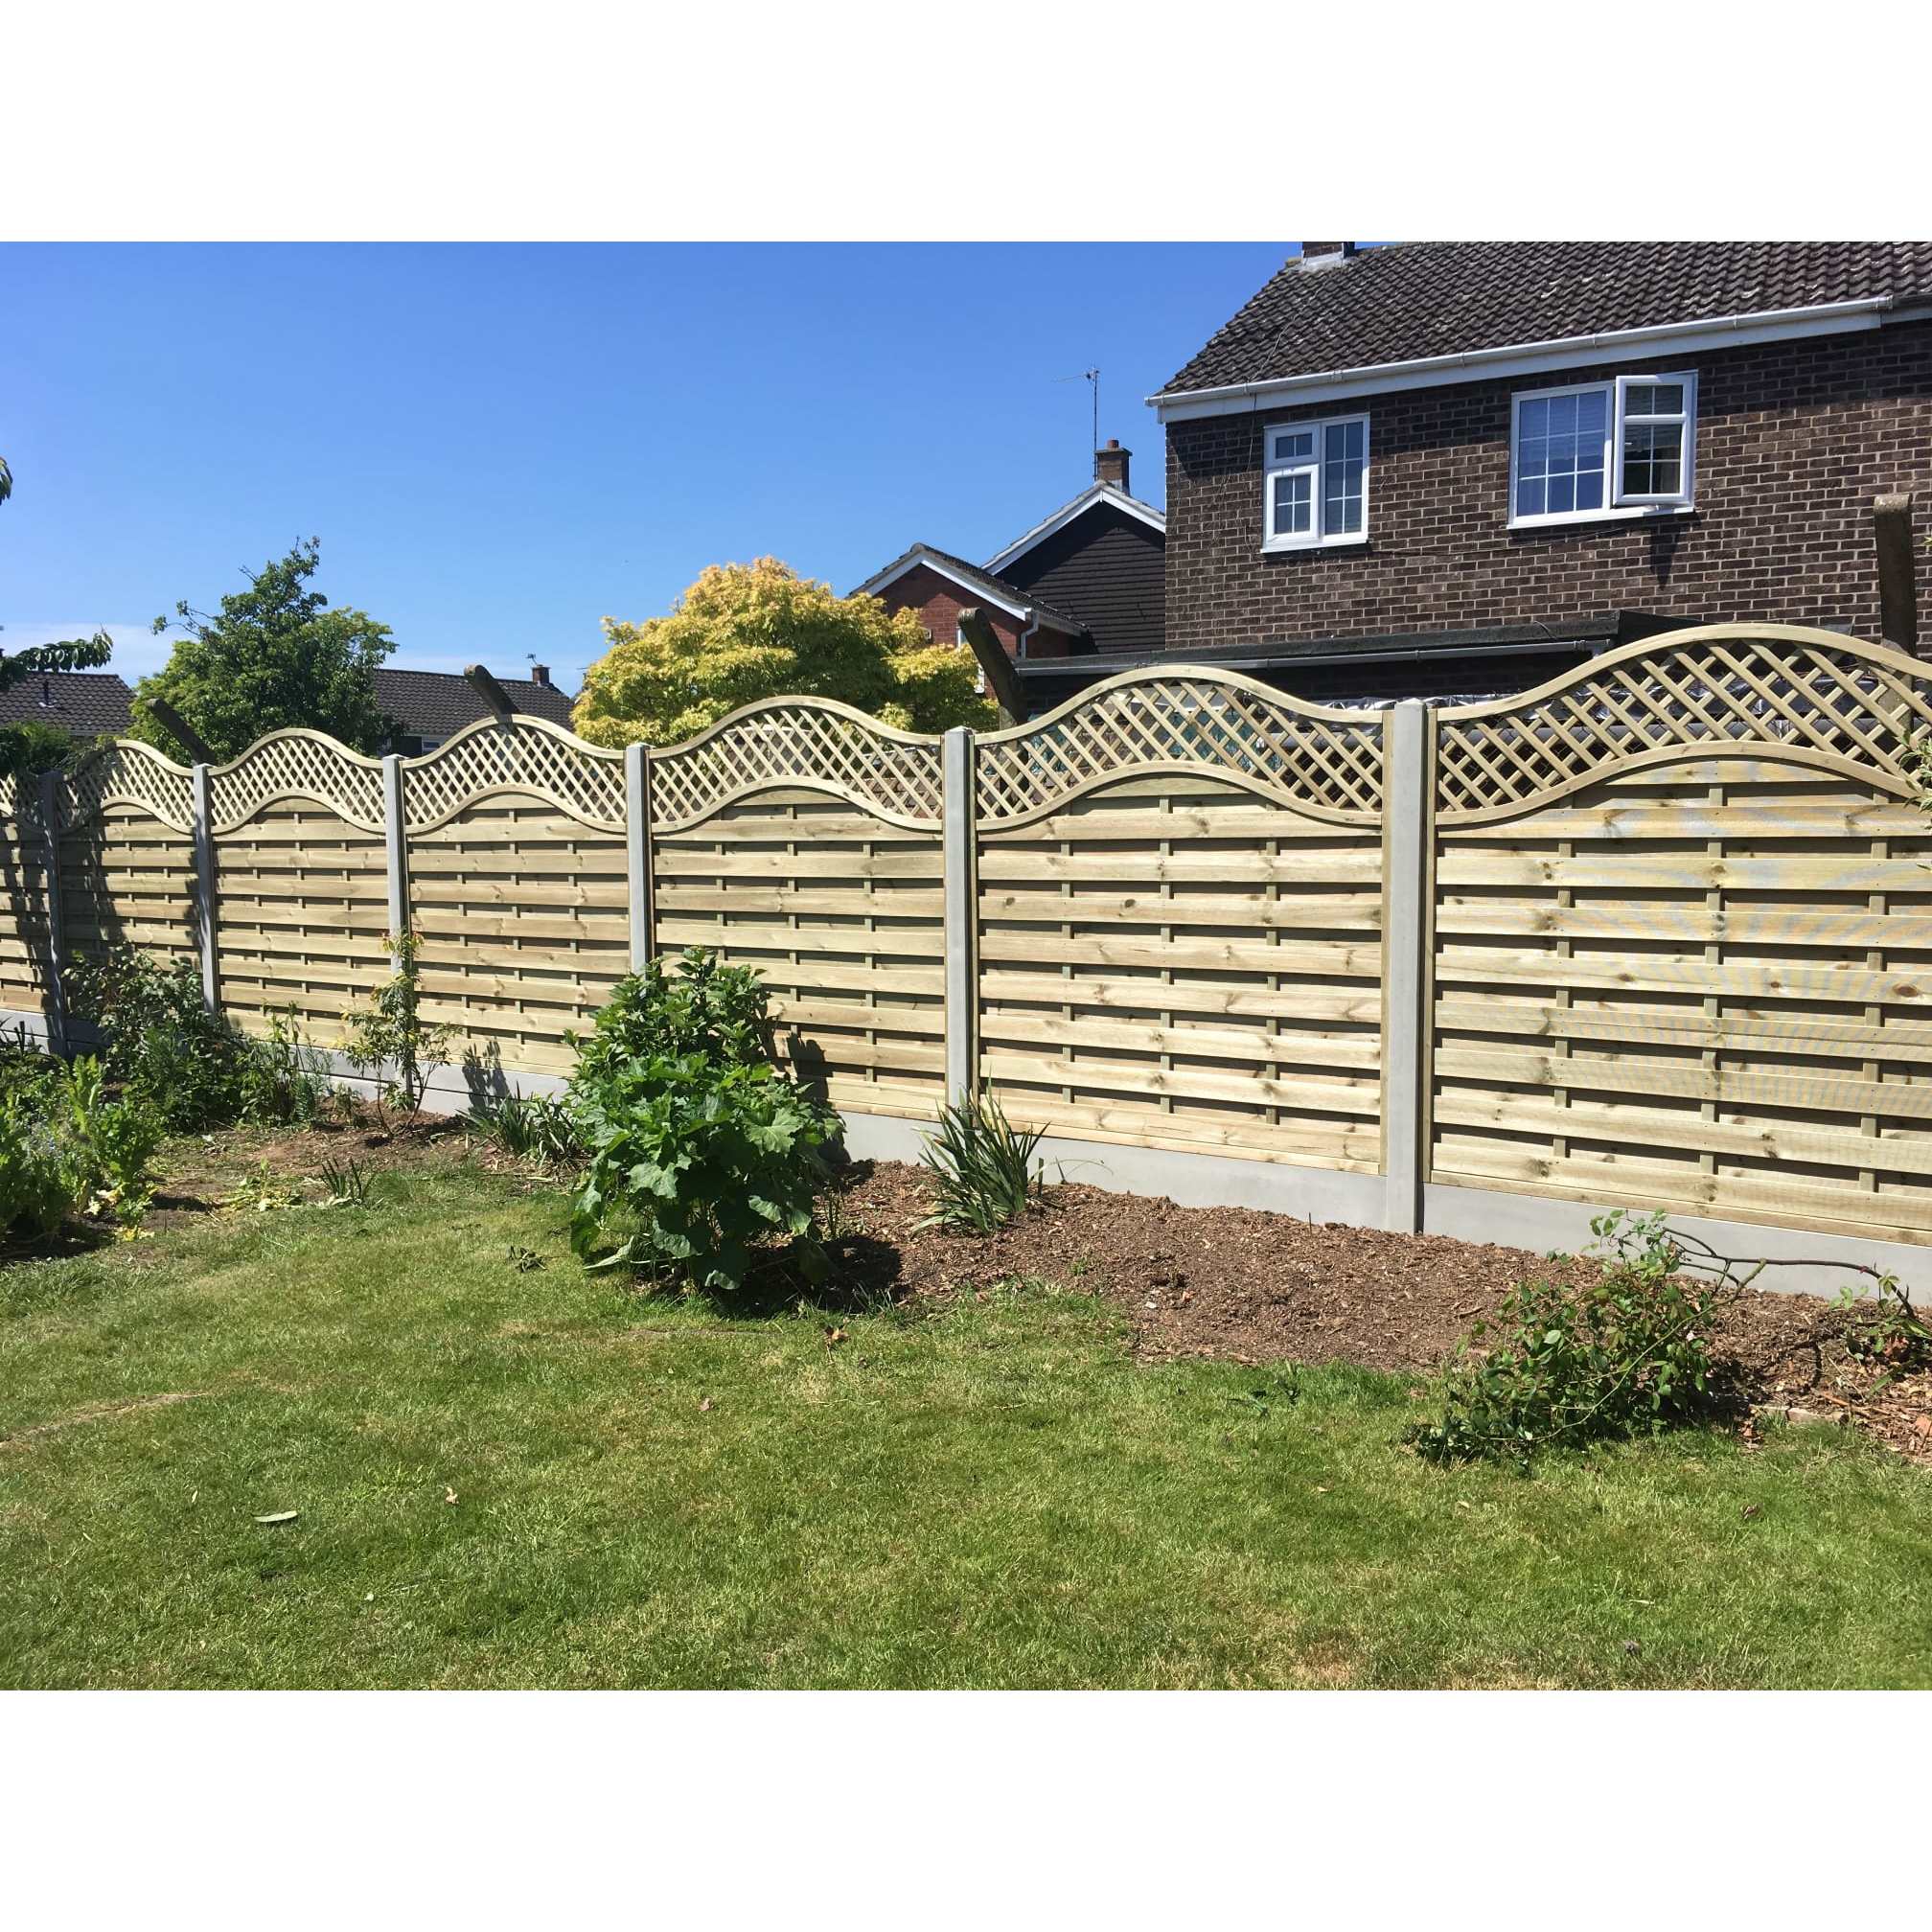 Fuller's Fencing - Norwich, Norfolk NR3 2QE - 07800 792280 | ShowMeLocal.com